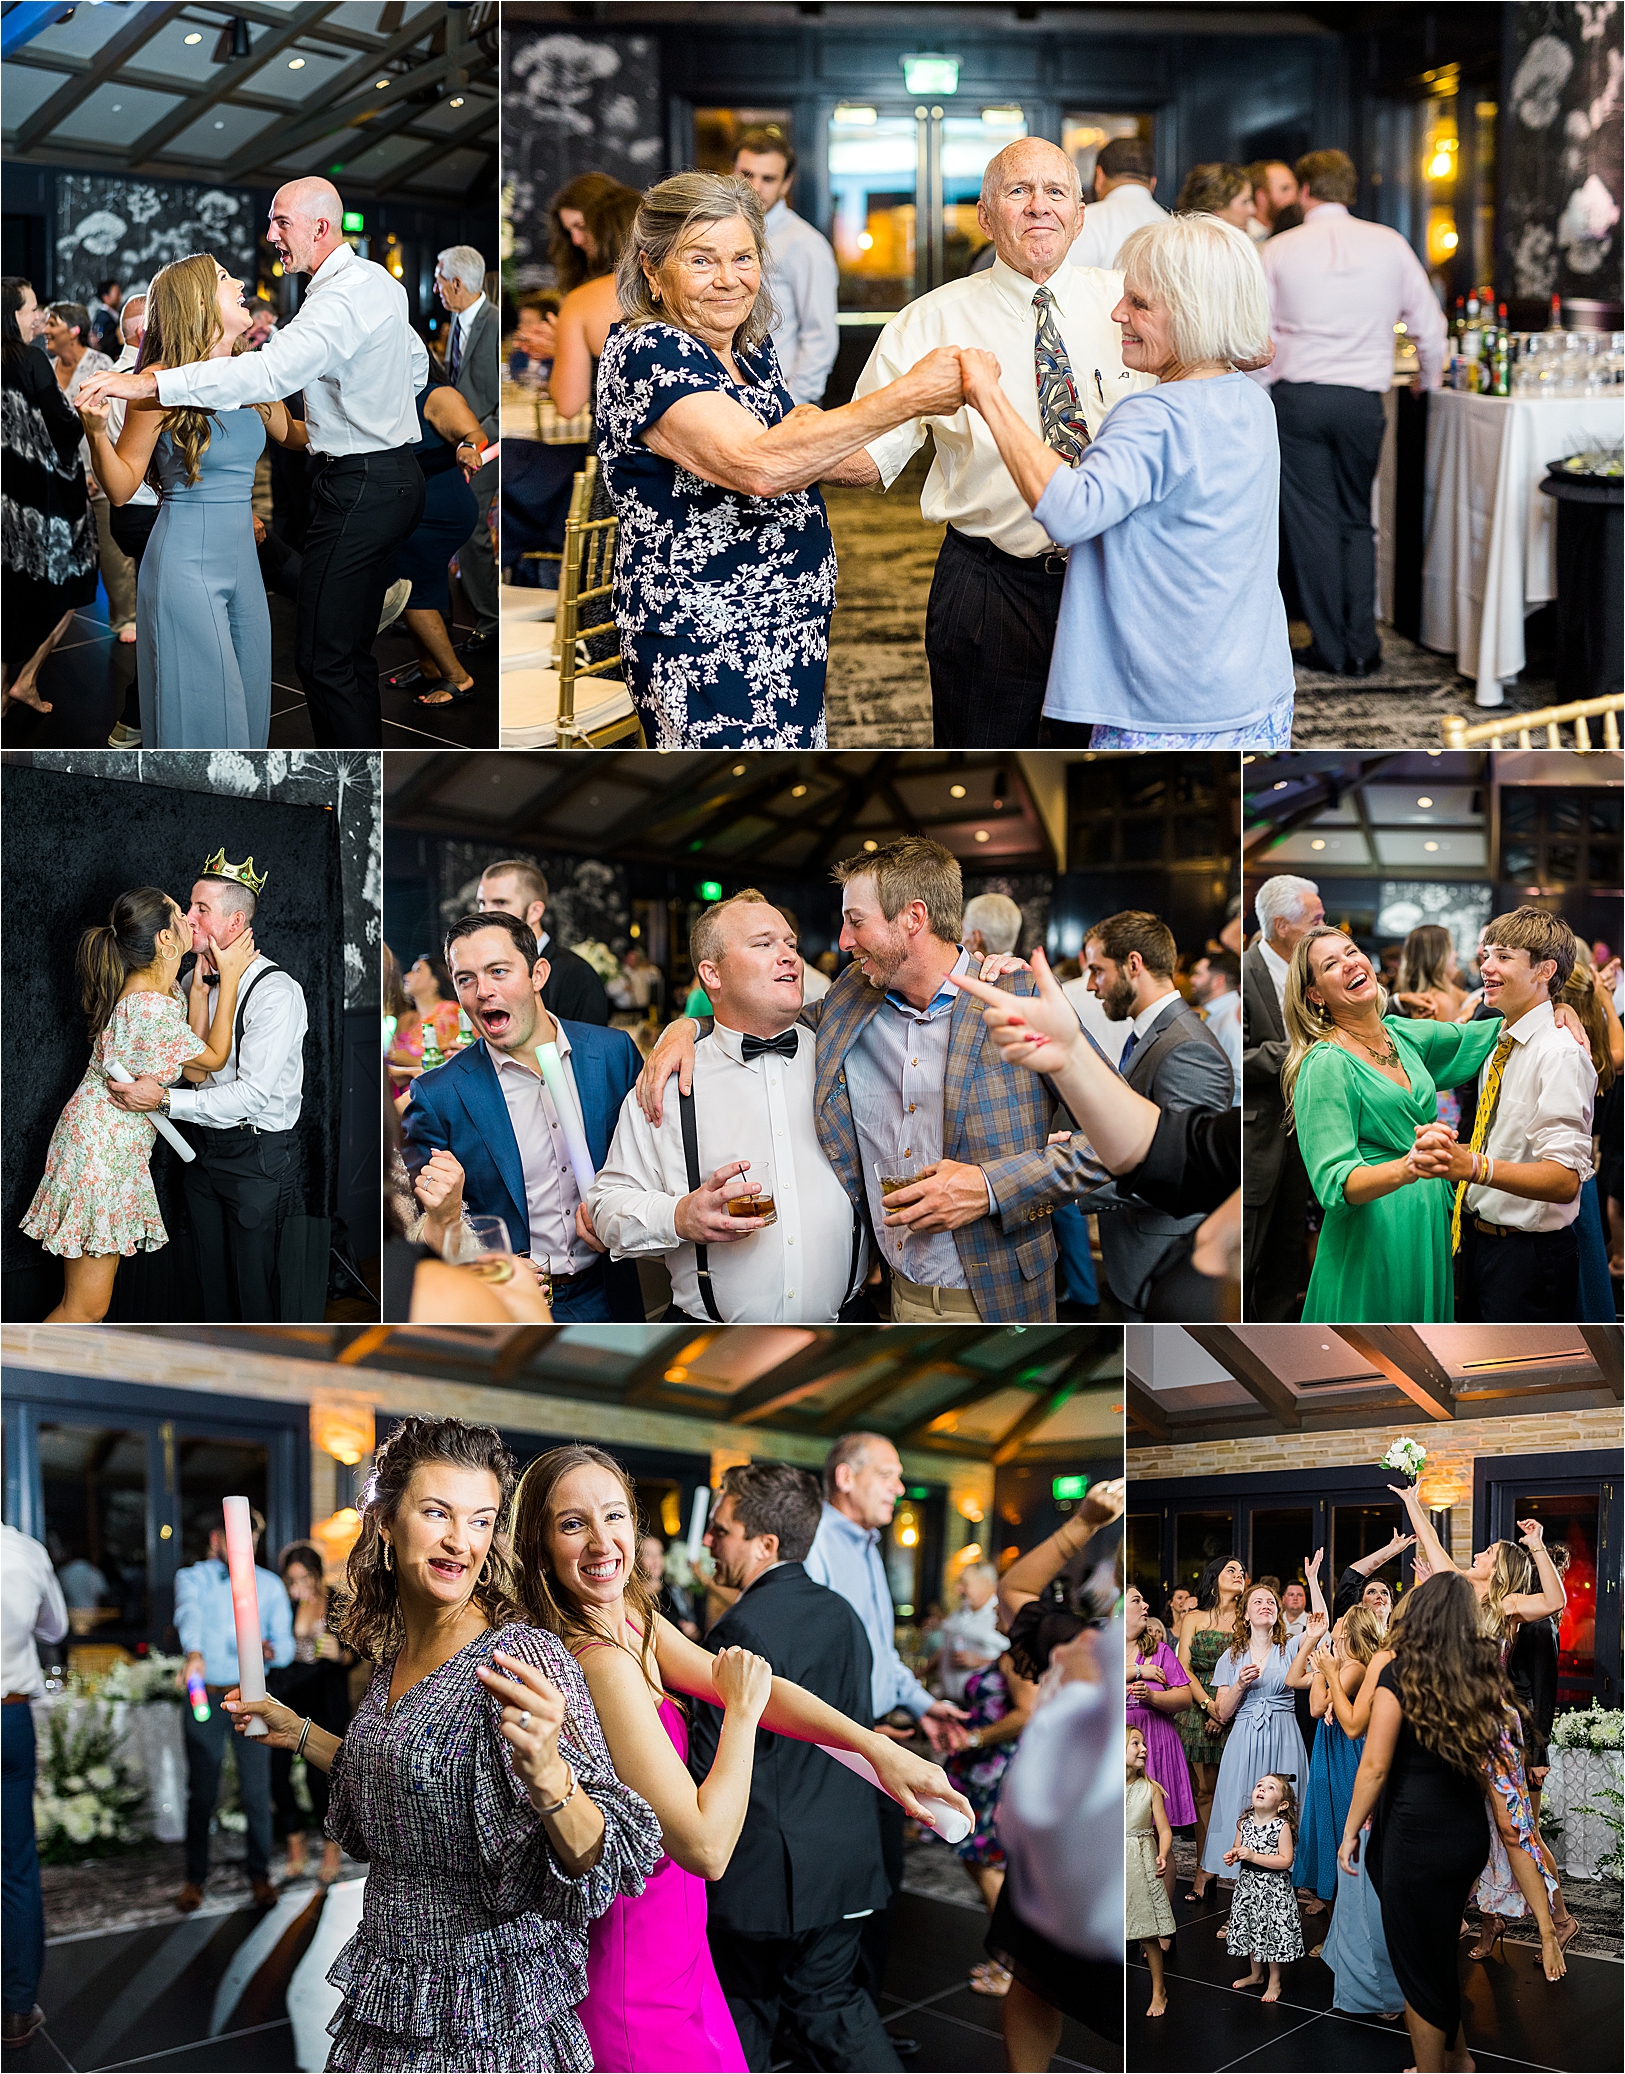 Guests dancing and having fun during a wedding reception at The Redberry Estate in San Antonio, Texas 